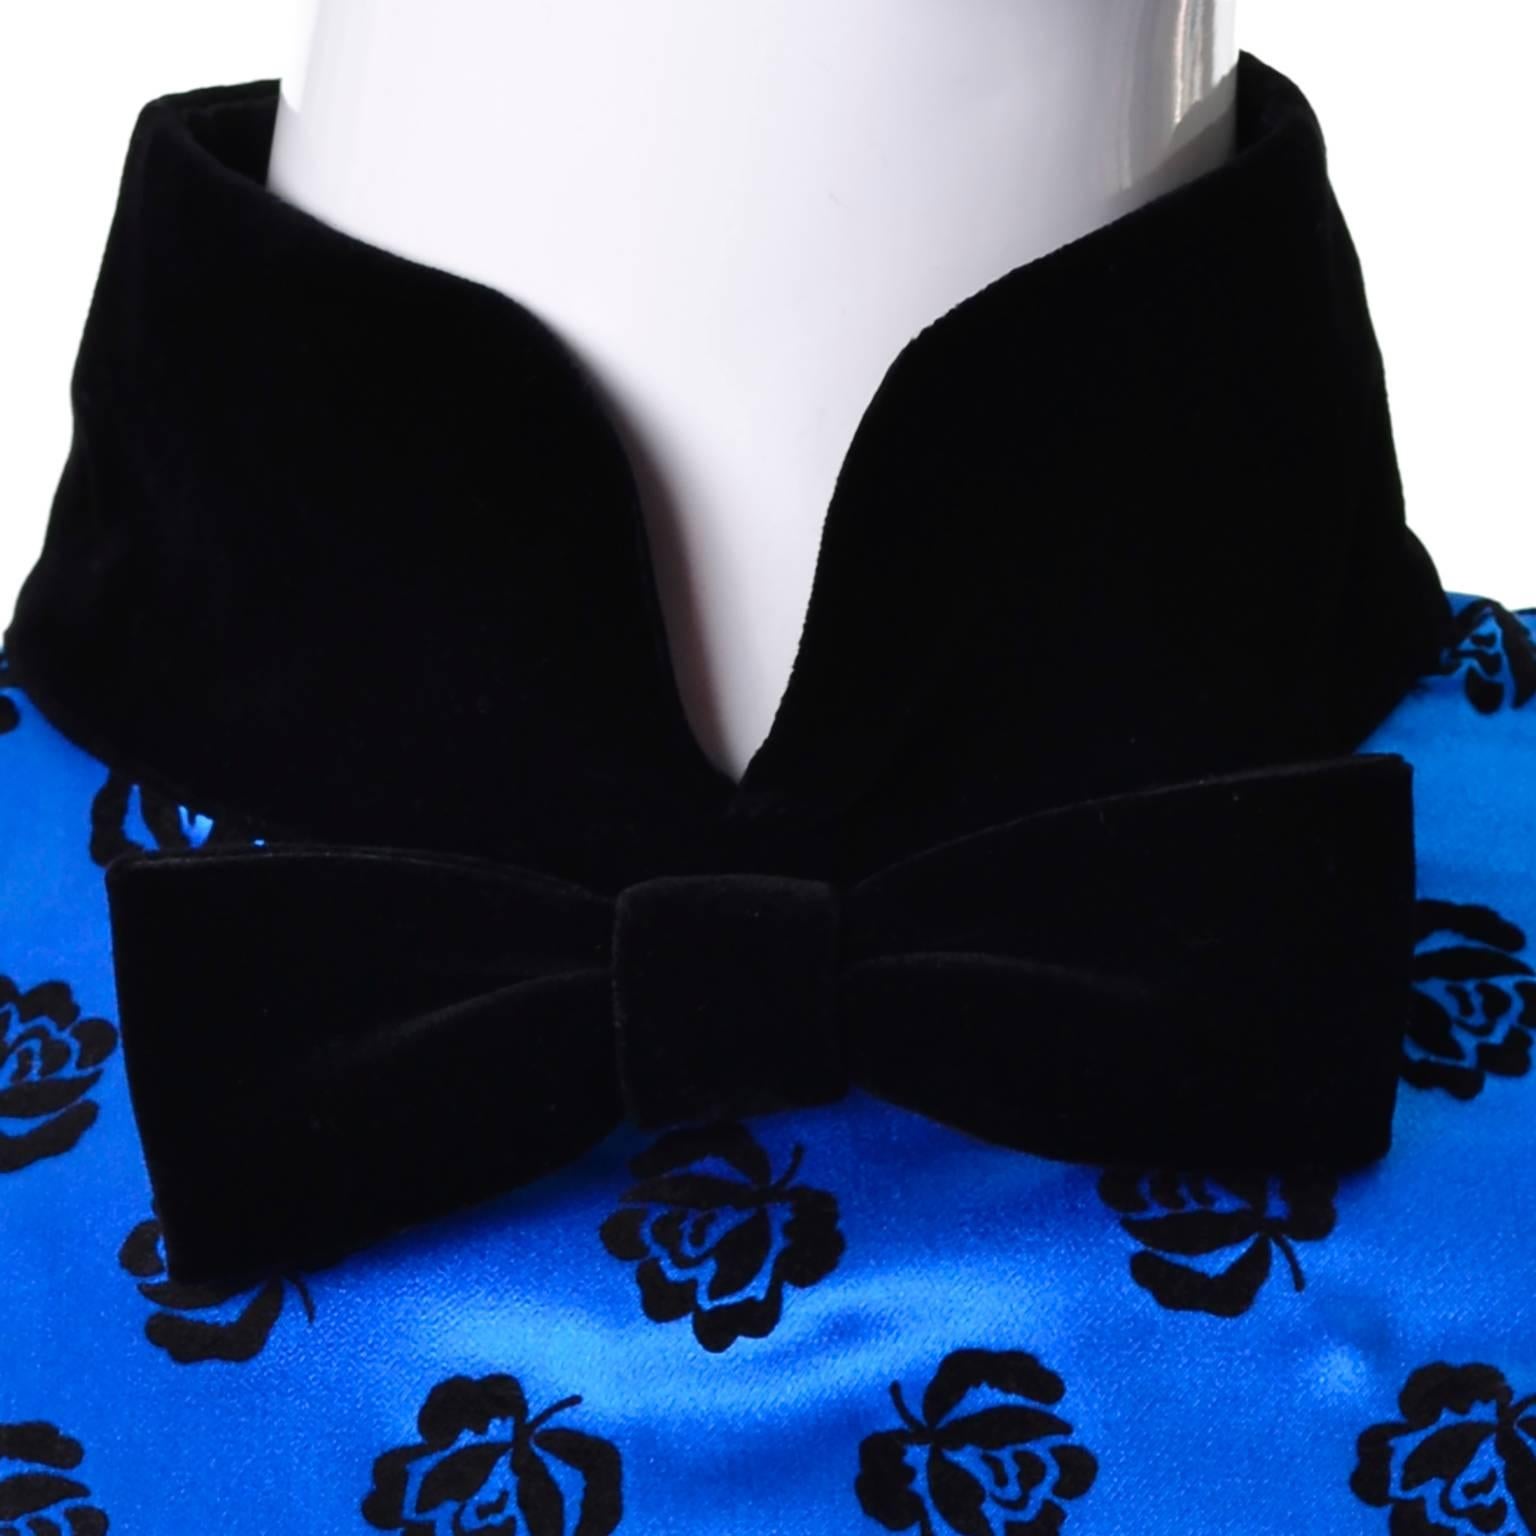 This is a beautiful 100% silk vintage Escada blouse designed by Margaretha Ley in the 1980's. The neck and bow at the neck are black velvet, as are the cuffs and decorative flocked roses covering the shimmering blue silk blouse.  This blouse is